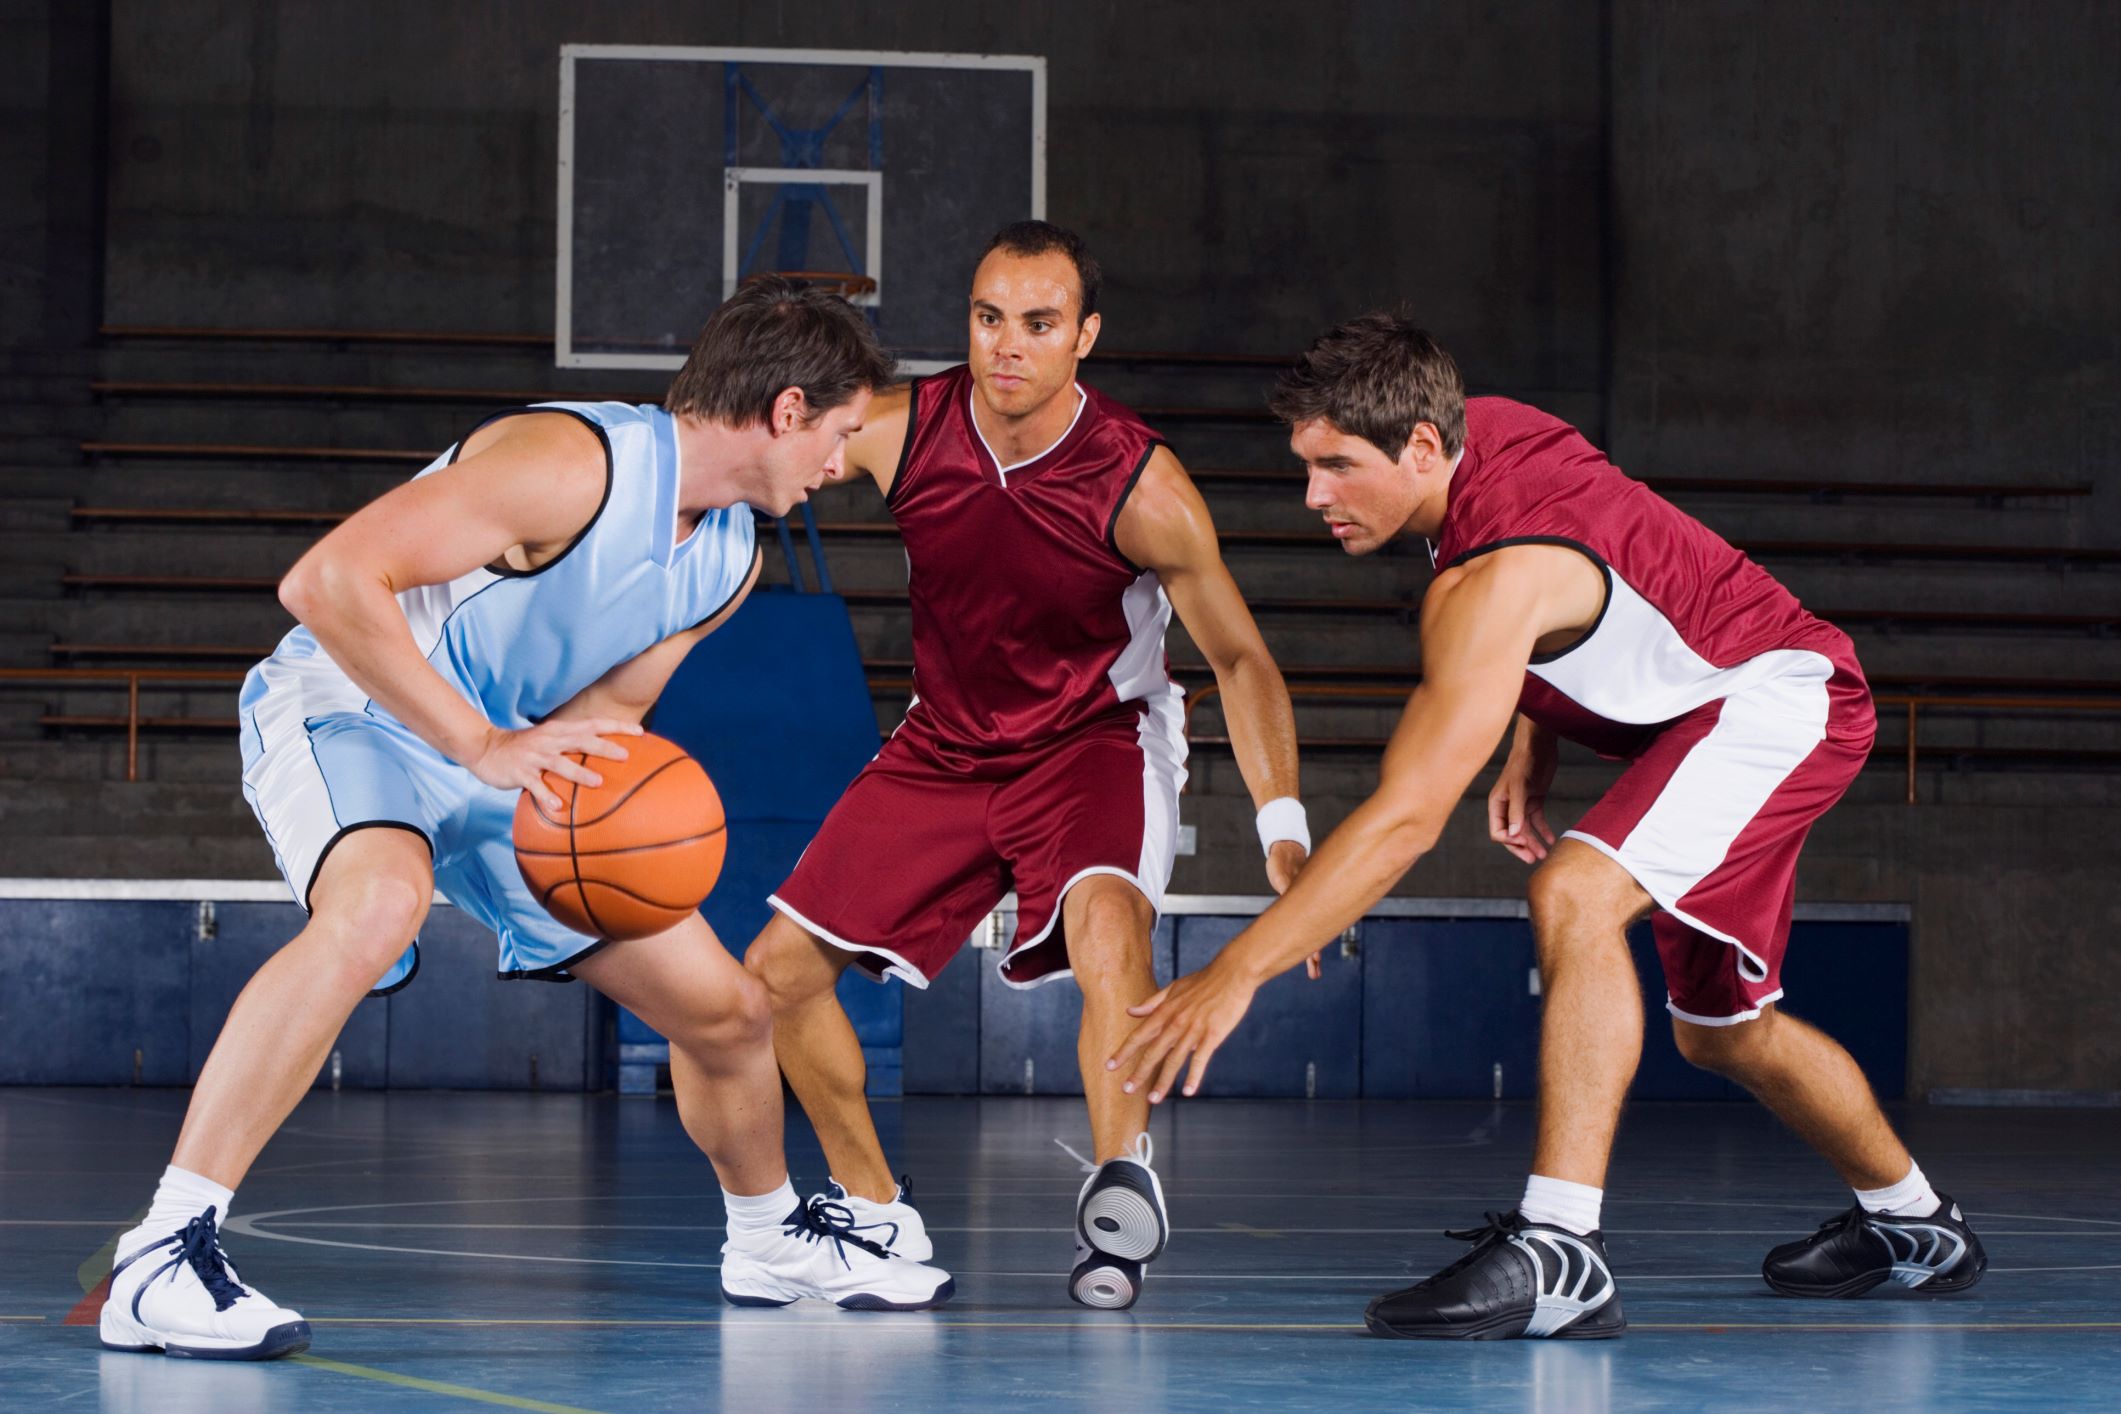 How To Improve Endurance For Basketball